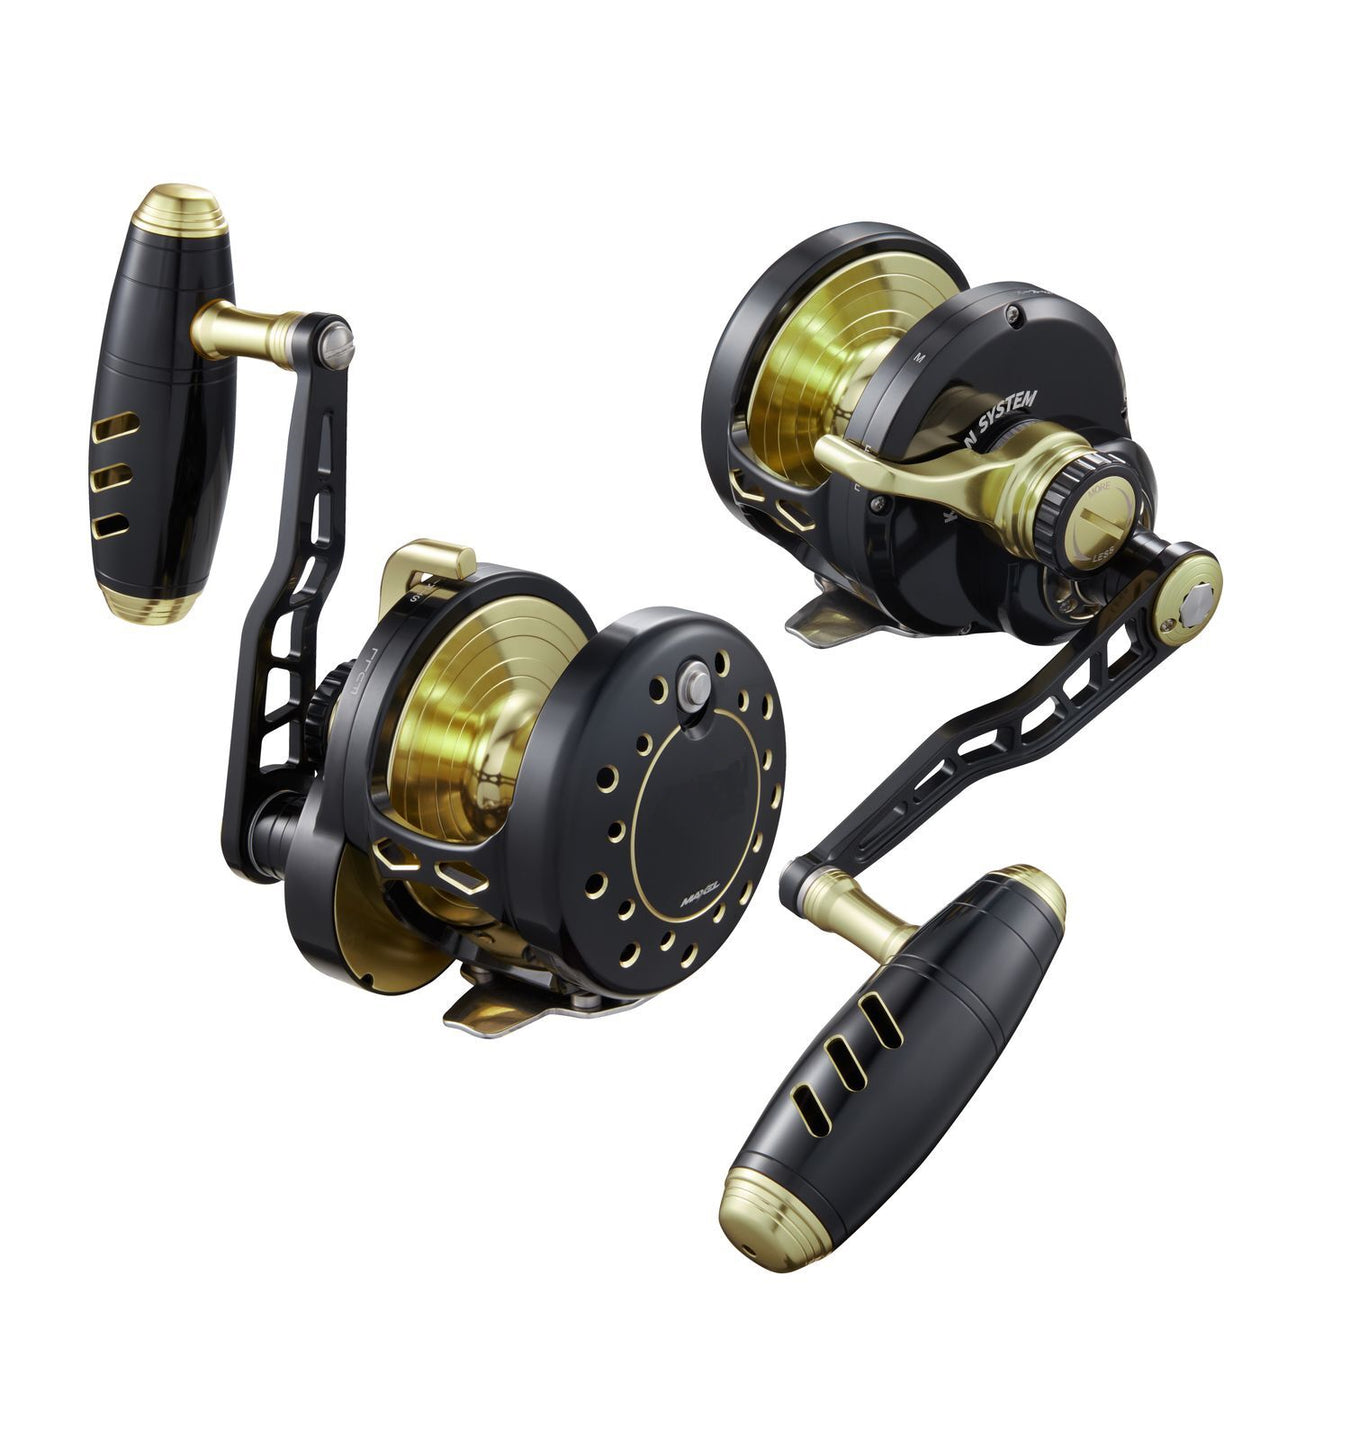 A Maxel Rage Pro conventional slow pitch lever drag fishing reel in the BGD (Black/Light Gold) color. Applicable models: R60H-PRO-BGD, R60HL-PRO-BGD, R80-PRO-BGD, R80L-PRO-BGD, R90-PRO-BGD, R90L-PRO-BGD, R130-PRO-BGD, R130L-PRO-BGD